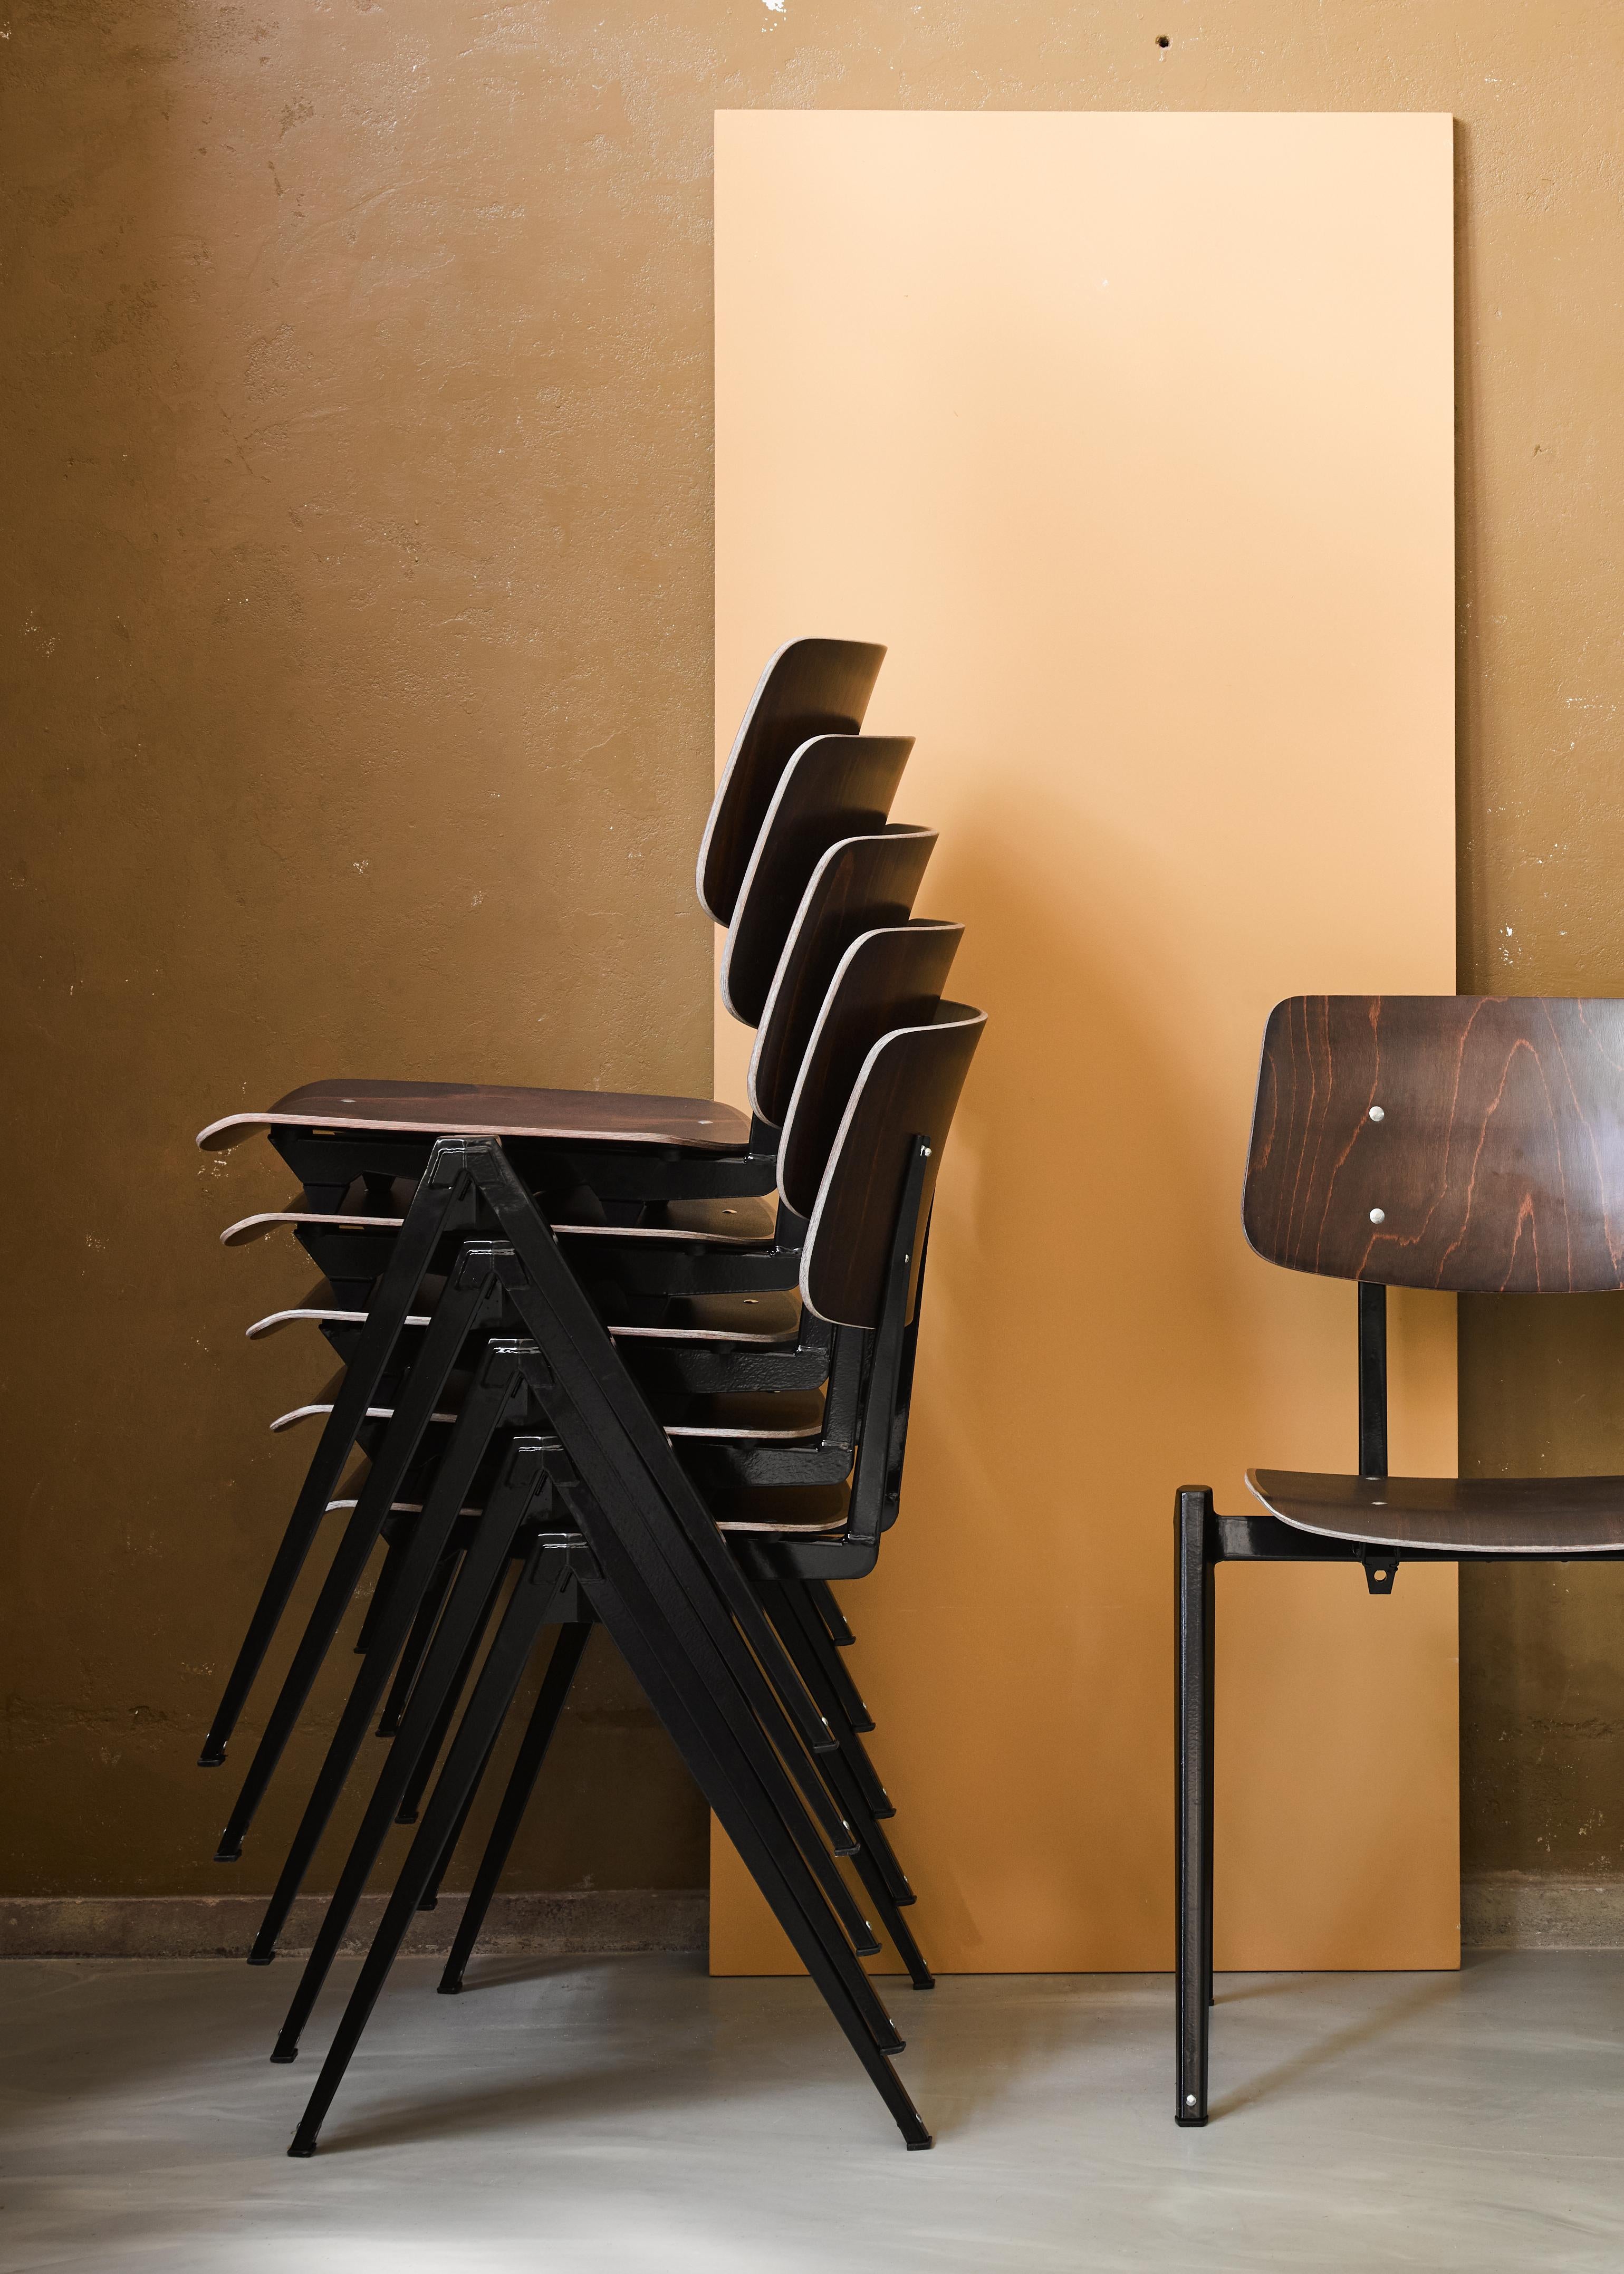 Functional / Industrial Galvanitas S21 stackable plywood chairs in the style of Prouvé. Frames are made of folded sheet steel and seat / backpanel of resin plywood. Stackable with a maximum of 6 chairs. Various colors, quantities and bespoke service